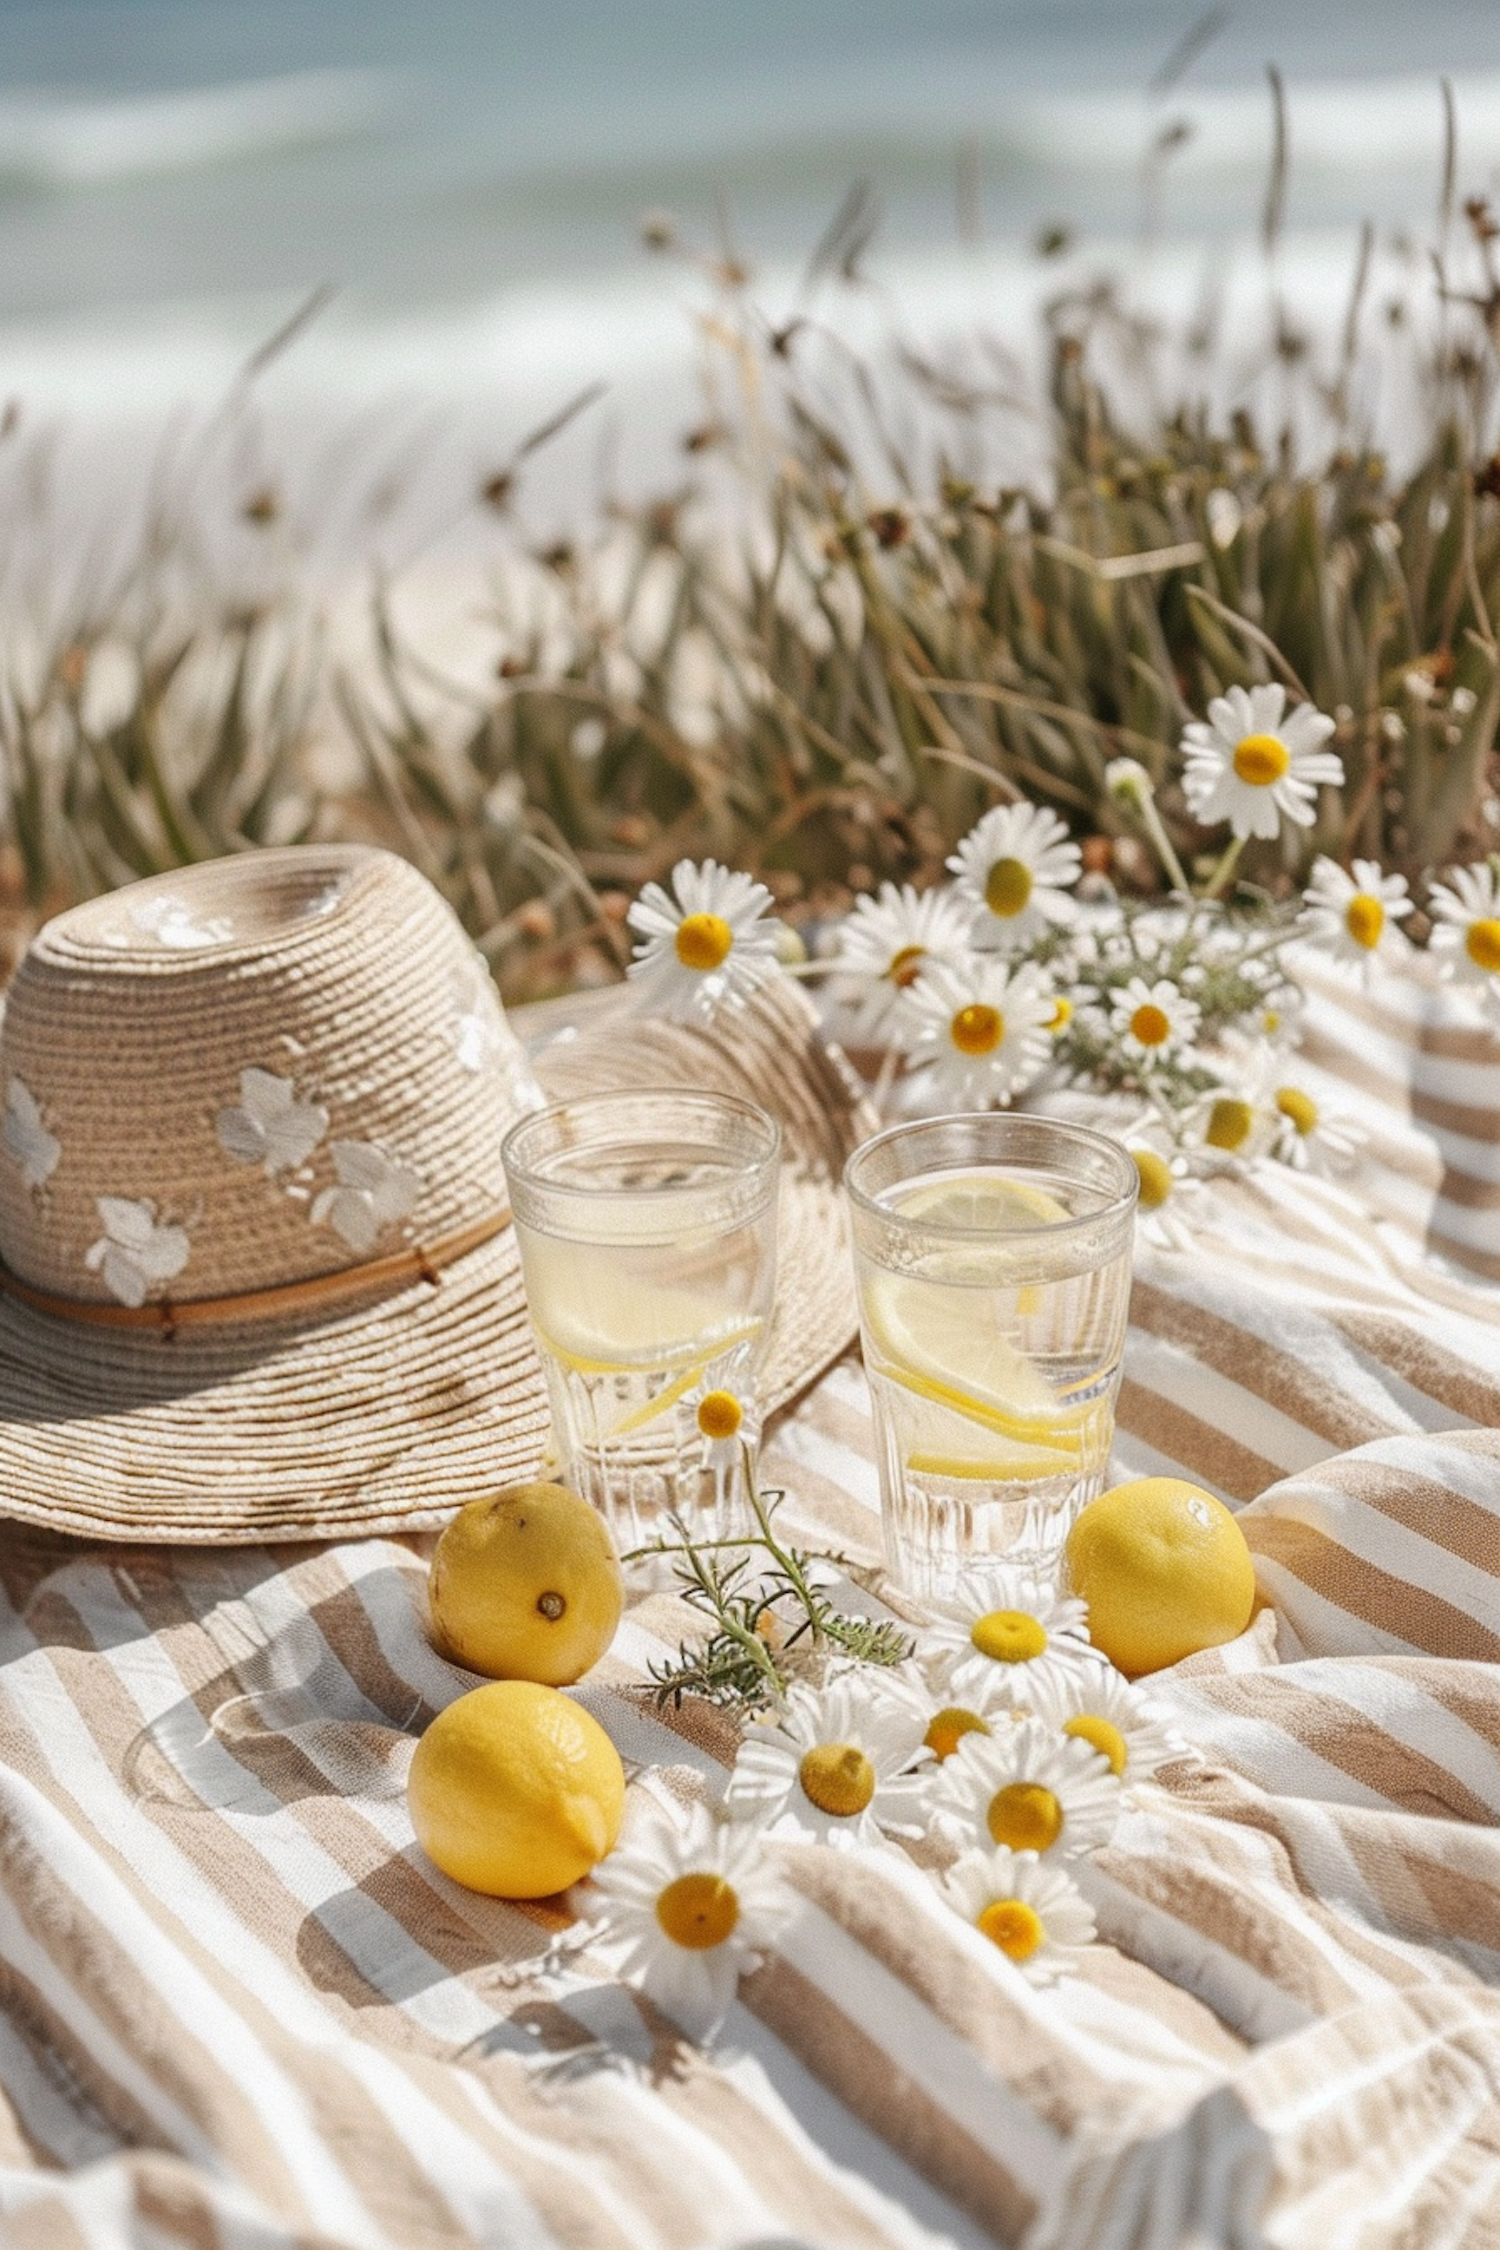 Summery Picnic Scene with Lemons and Straw Hat